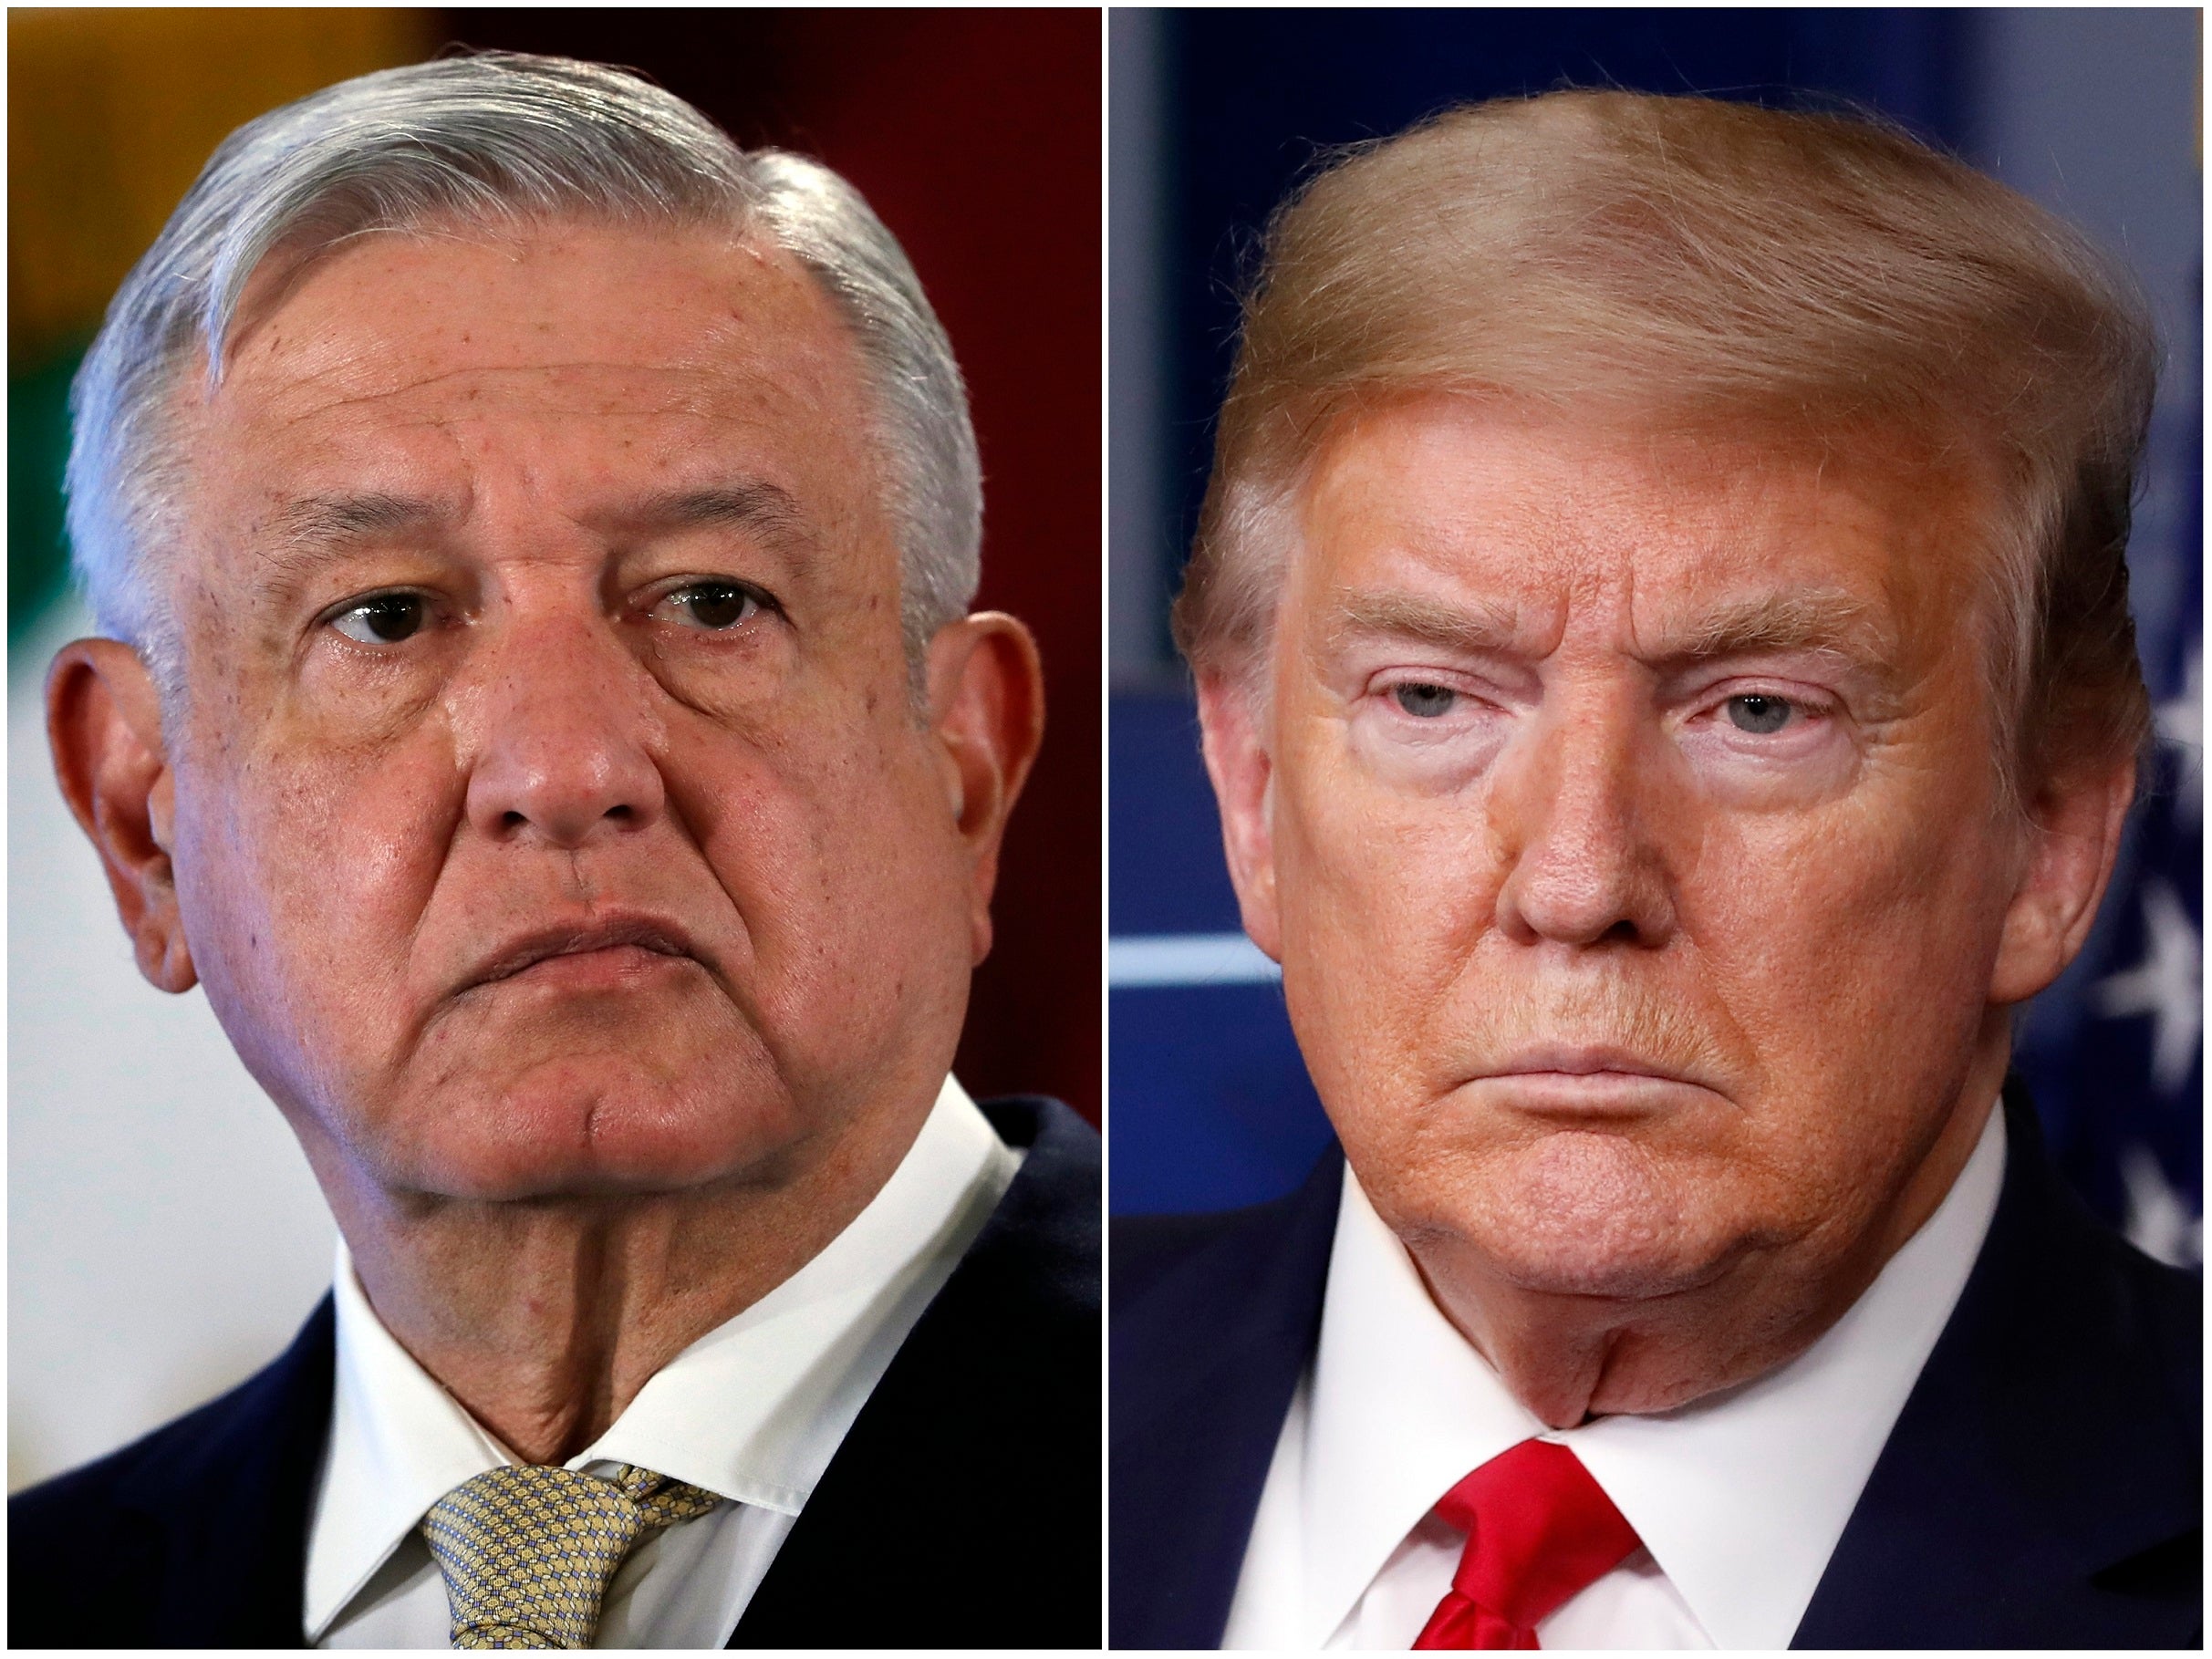 Mexican President Andres Manuel Lopez Obrador, left, on Nov. 29, 2019, in Mexico City and US President Donald Trump on April 17, 2020, in Washington, DC.